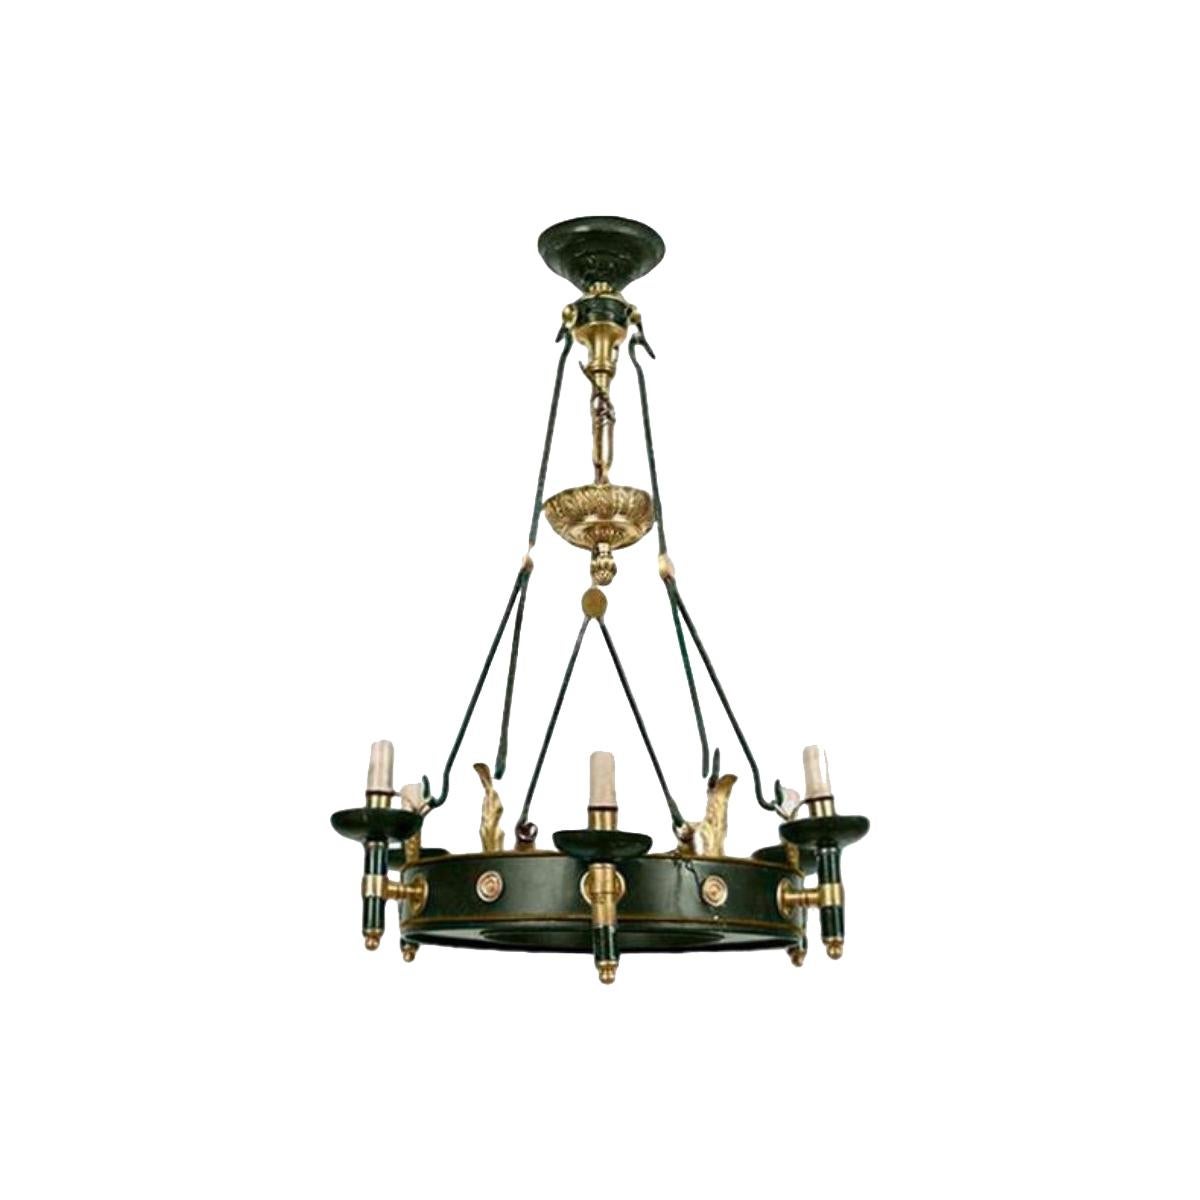 Maison Jansen Regency Style Six-Arm Painted Iron and Bronze Chandelier For Sale